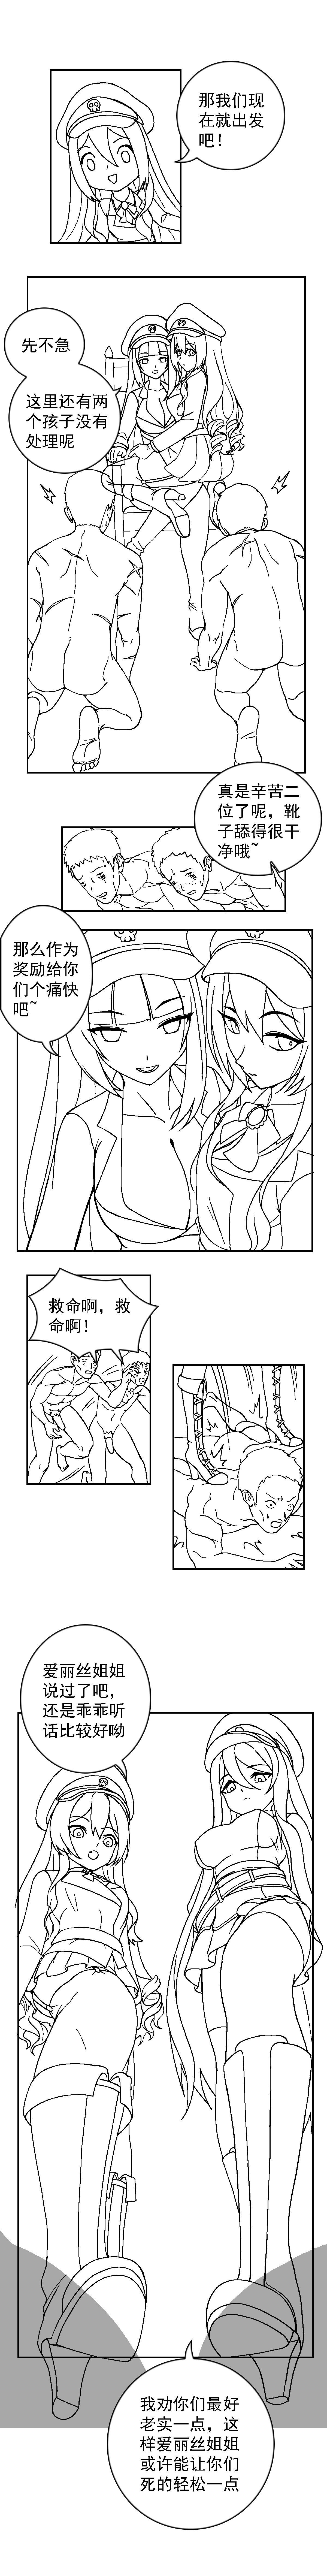 Cum Swallow [Weixiefashi] The Cruel Empire Executioners black-and-white [帝国处刑官爱丽丝2：残酷的处刑天使][黑白] Rough - Page 5